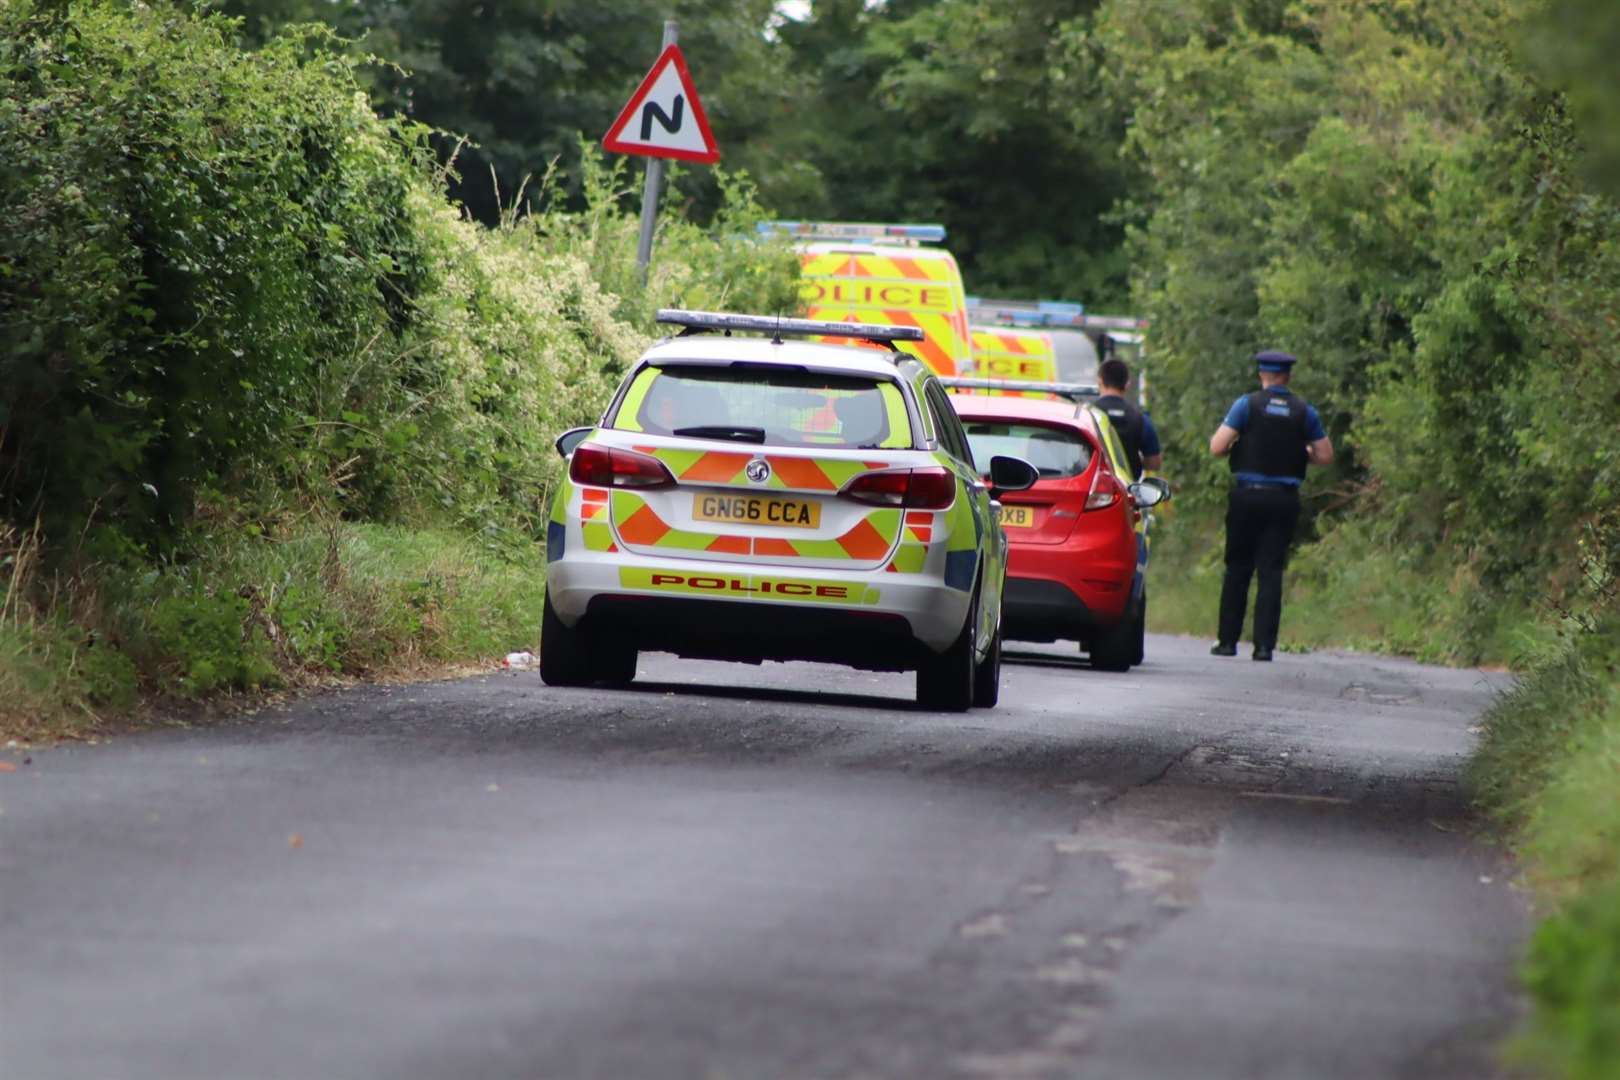 Police carrying out a search in Sittingbourne after the incident. Picture: John Nurden